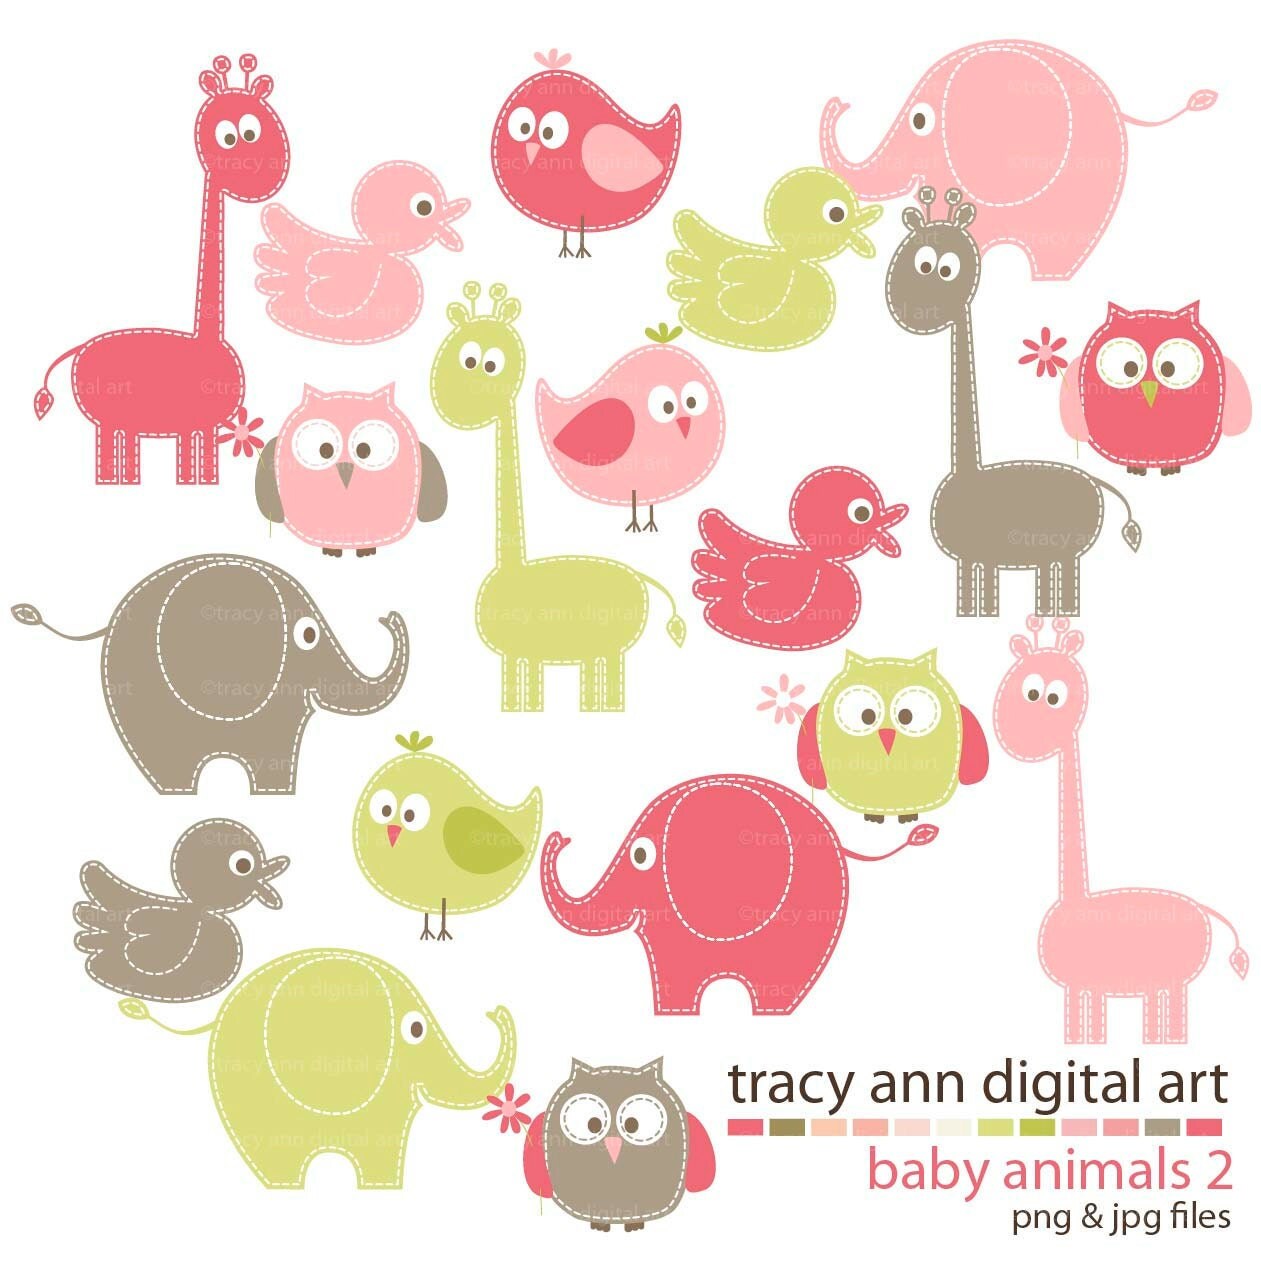 new baby clipart - photo #37